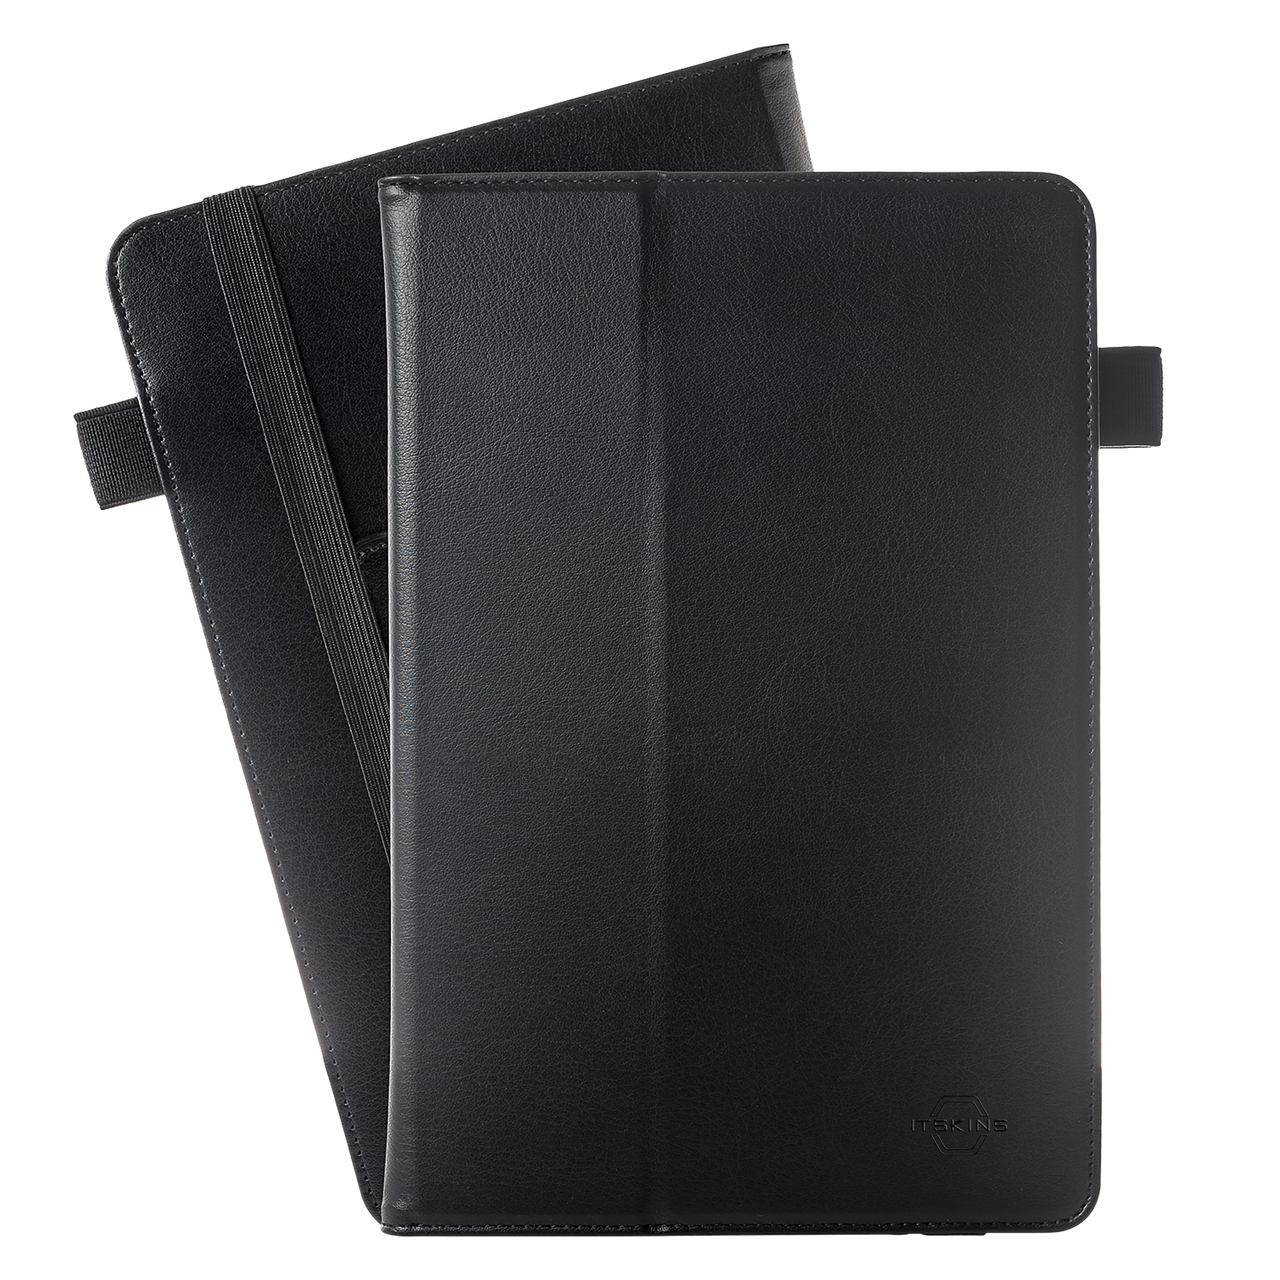 ItSkins Universal Folio Case for 7 to 8 Inch Tablets (Black)